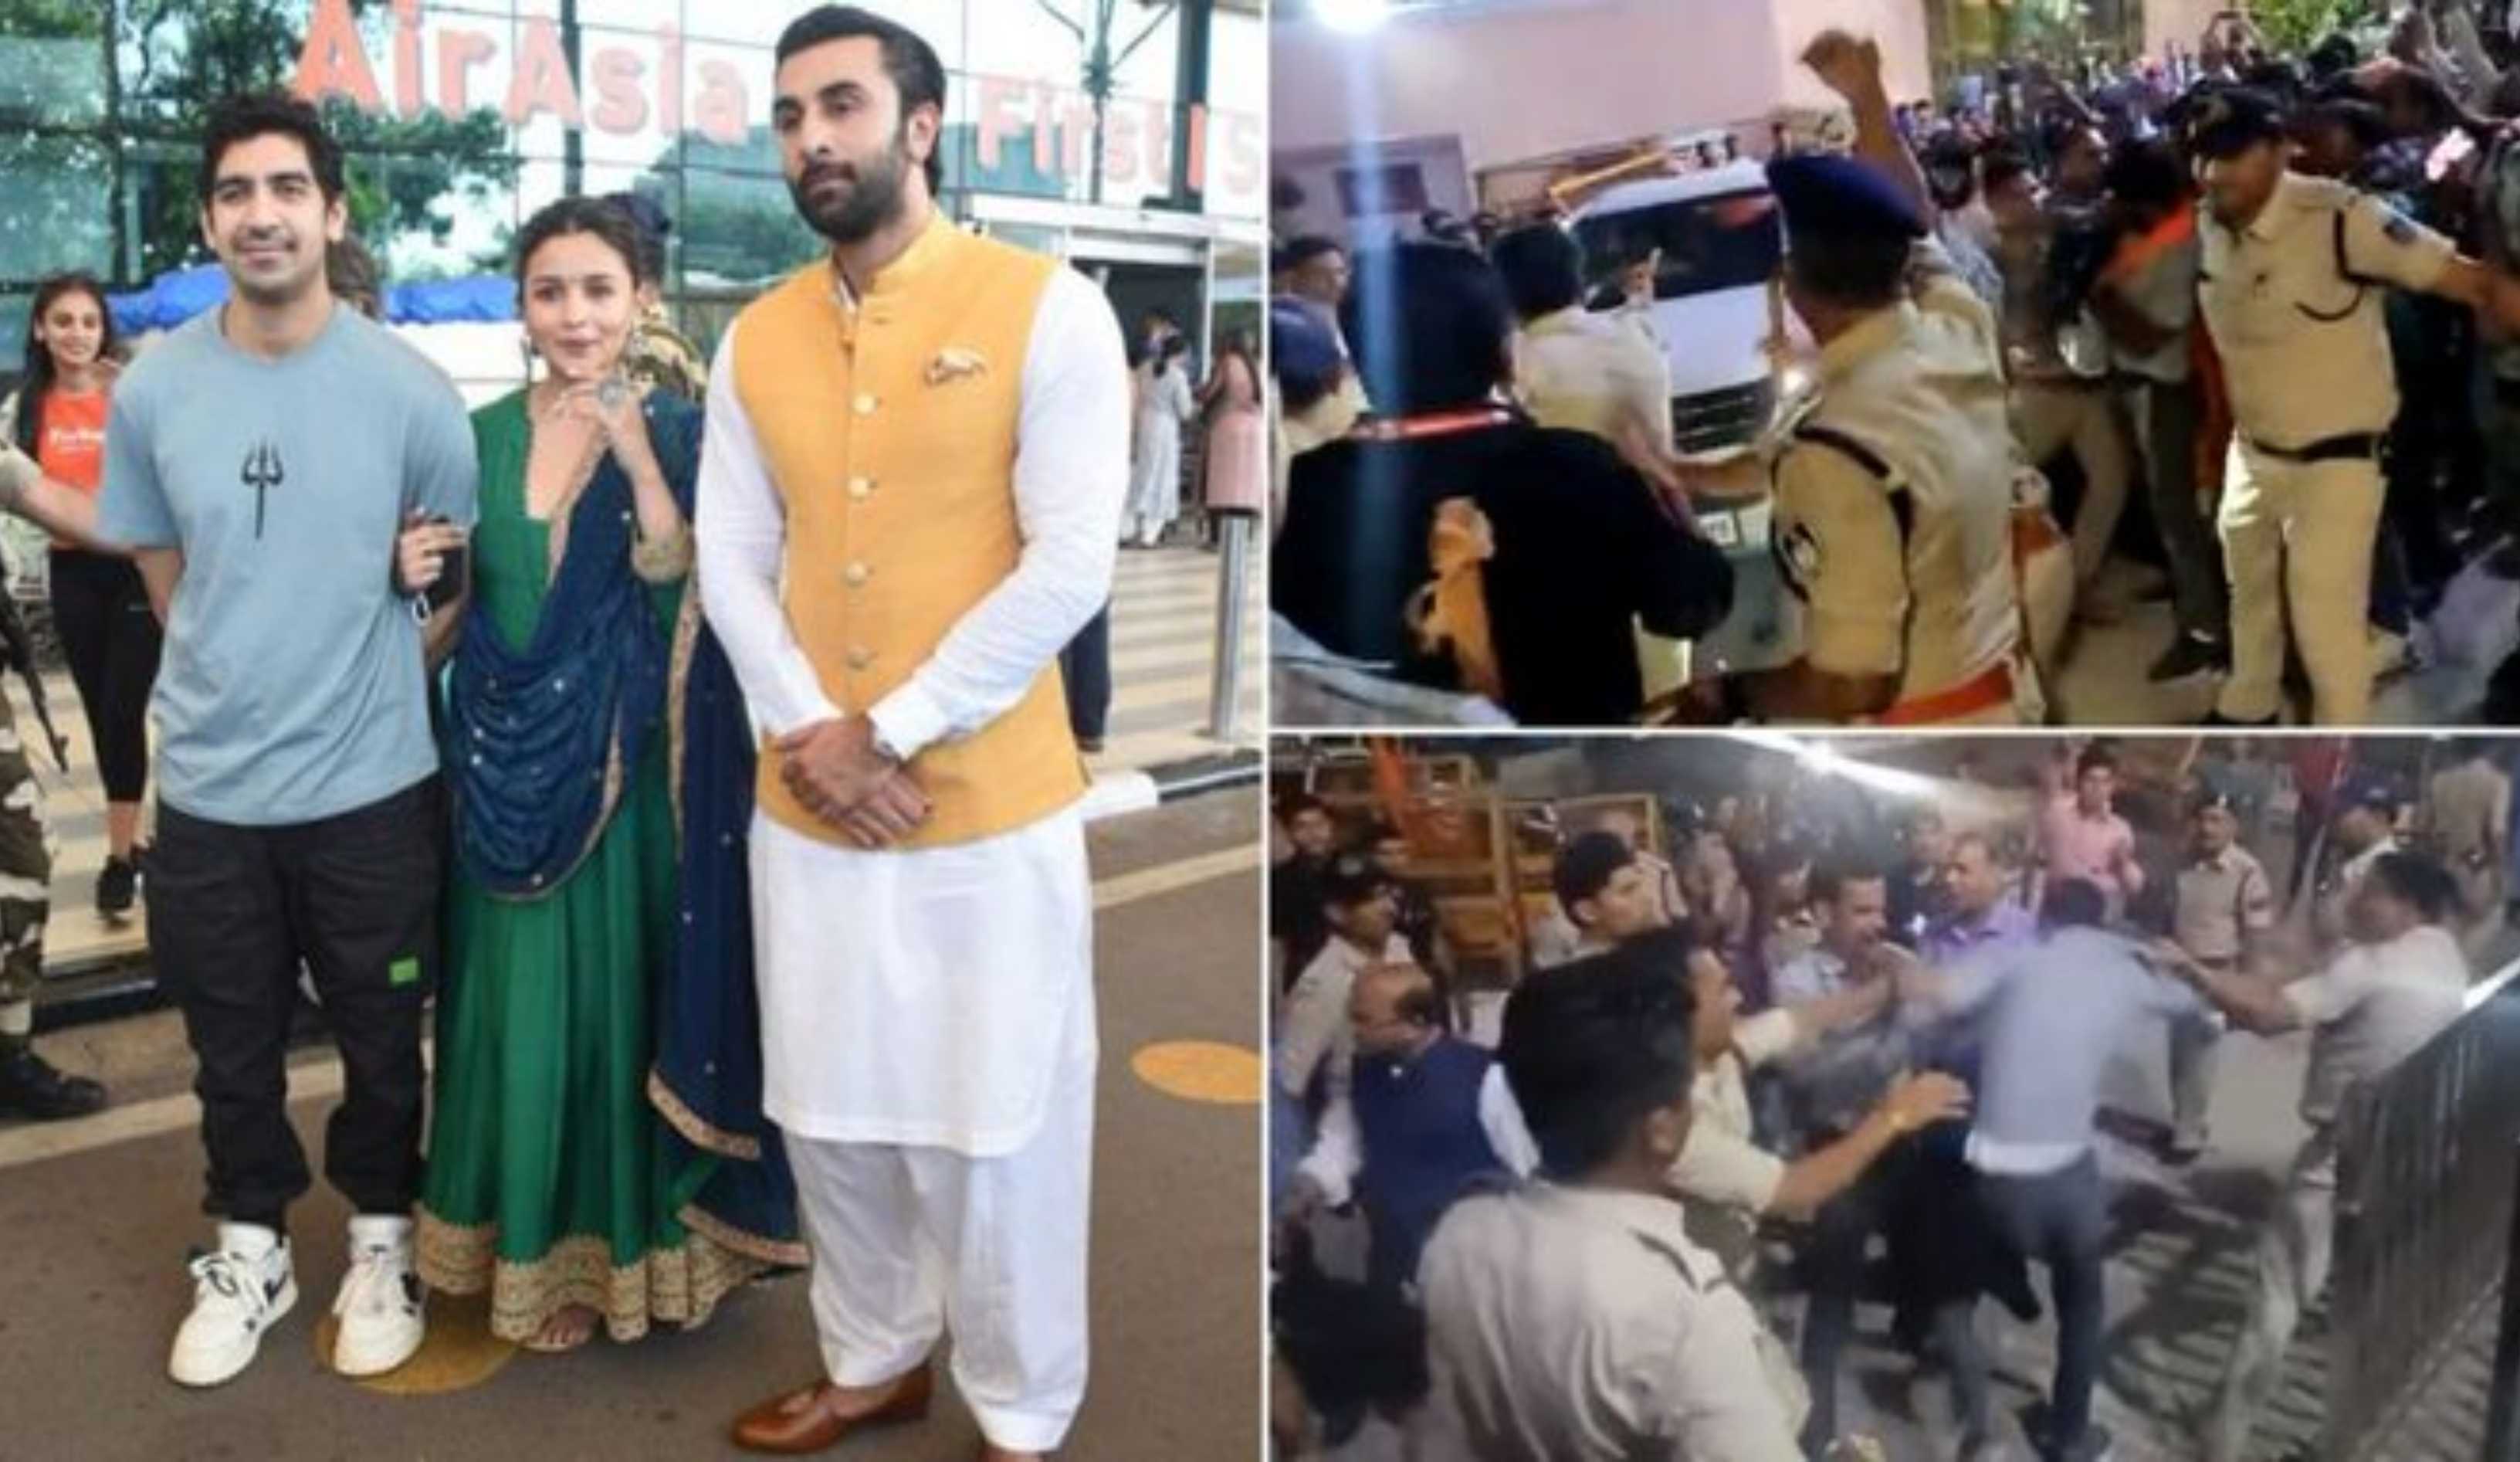 Ranbir Kapoor, Alia Bhatt leave without darshan after protest broke out at Ujjain's Mahakal Temple; here's what happened